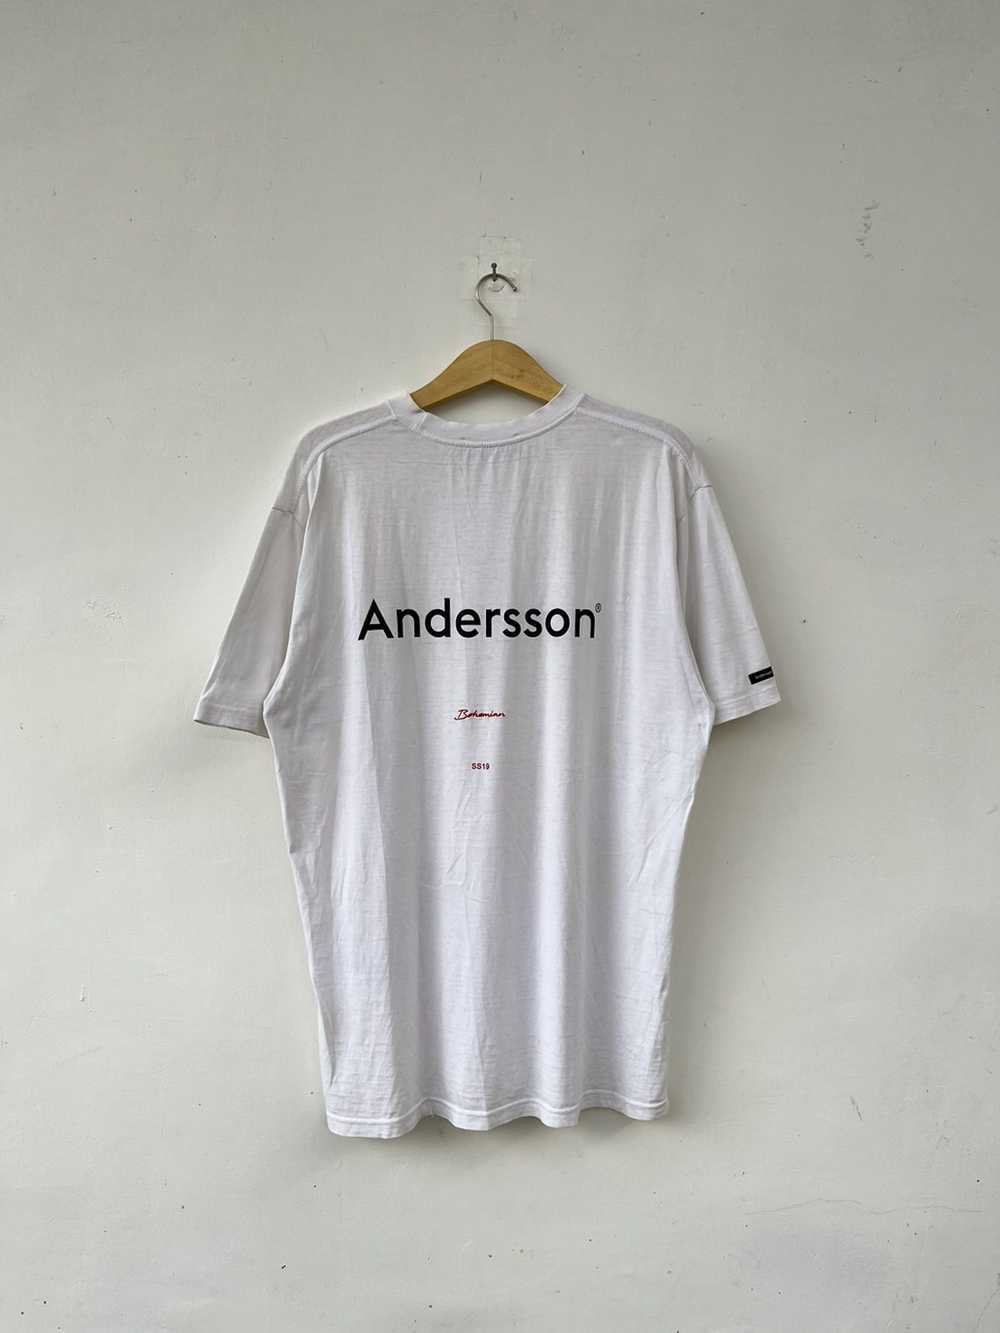 Andersson Bell ANDERSON BELL SS19 ‘BOHEMIAN’ TEE - image 1